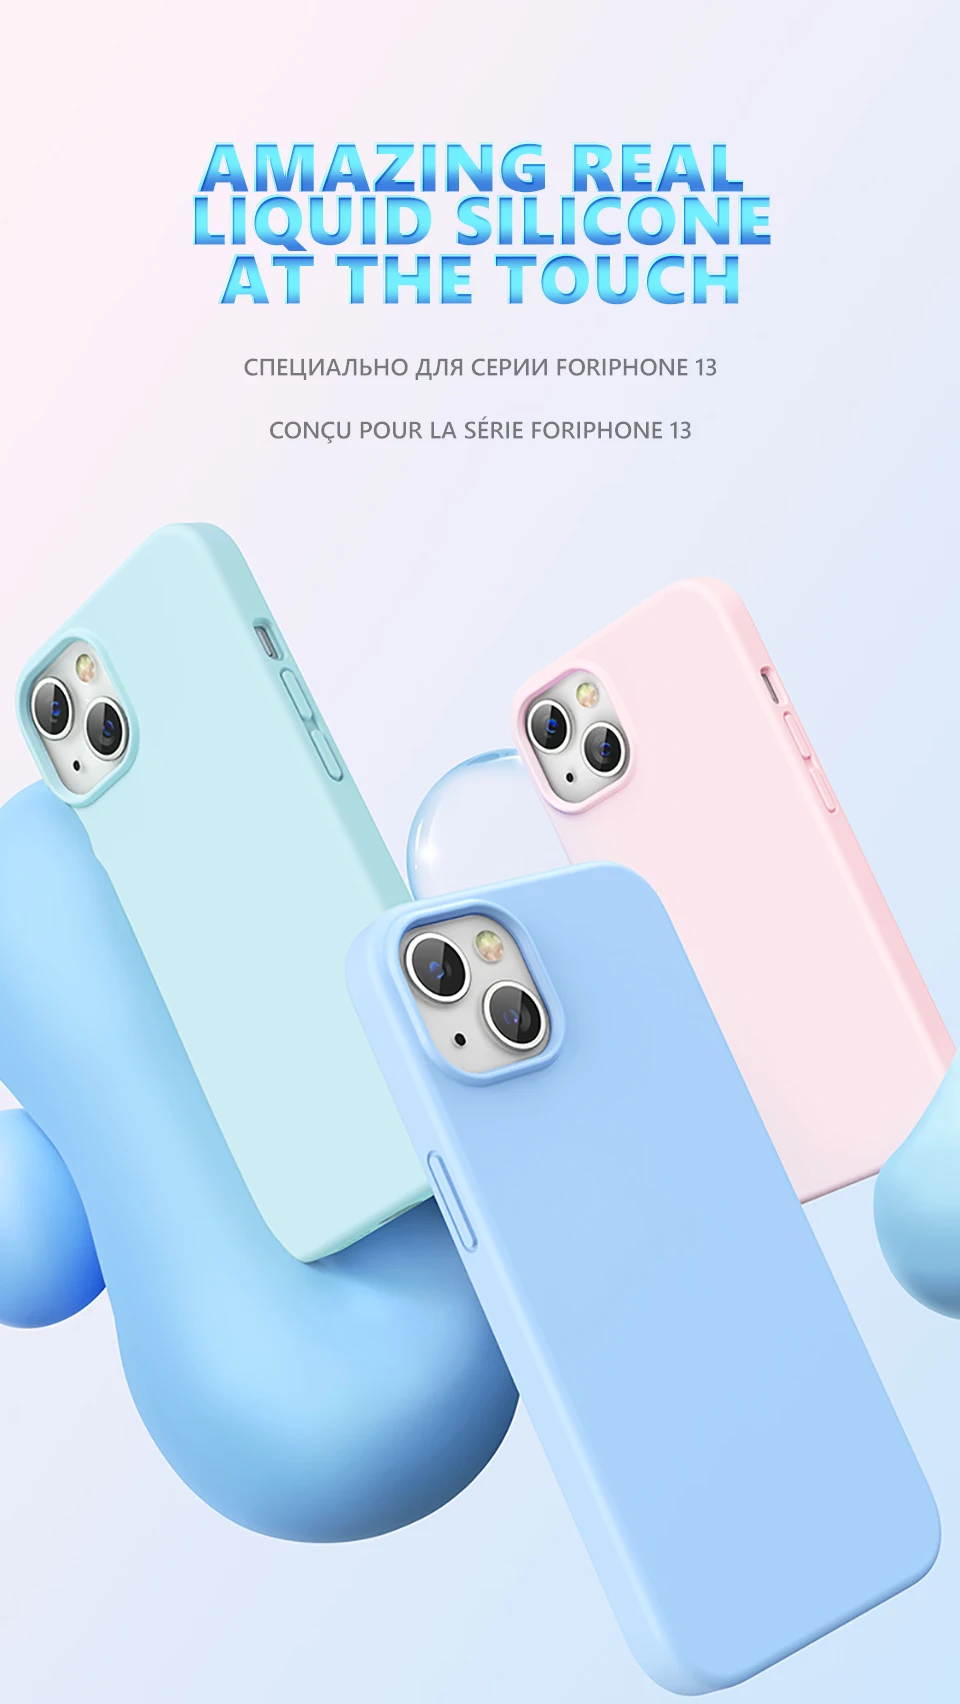 Liquid Silicone Phone Case For iPhone 13 Pro Max Case 12 Mini 11 Pro XS Max XR X 8 Plus SE 2020 Solid Color Fur Shockproof Cover case for iphone 13 pro max